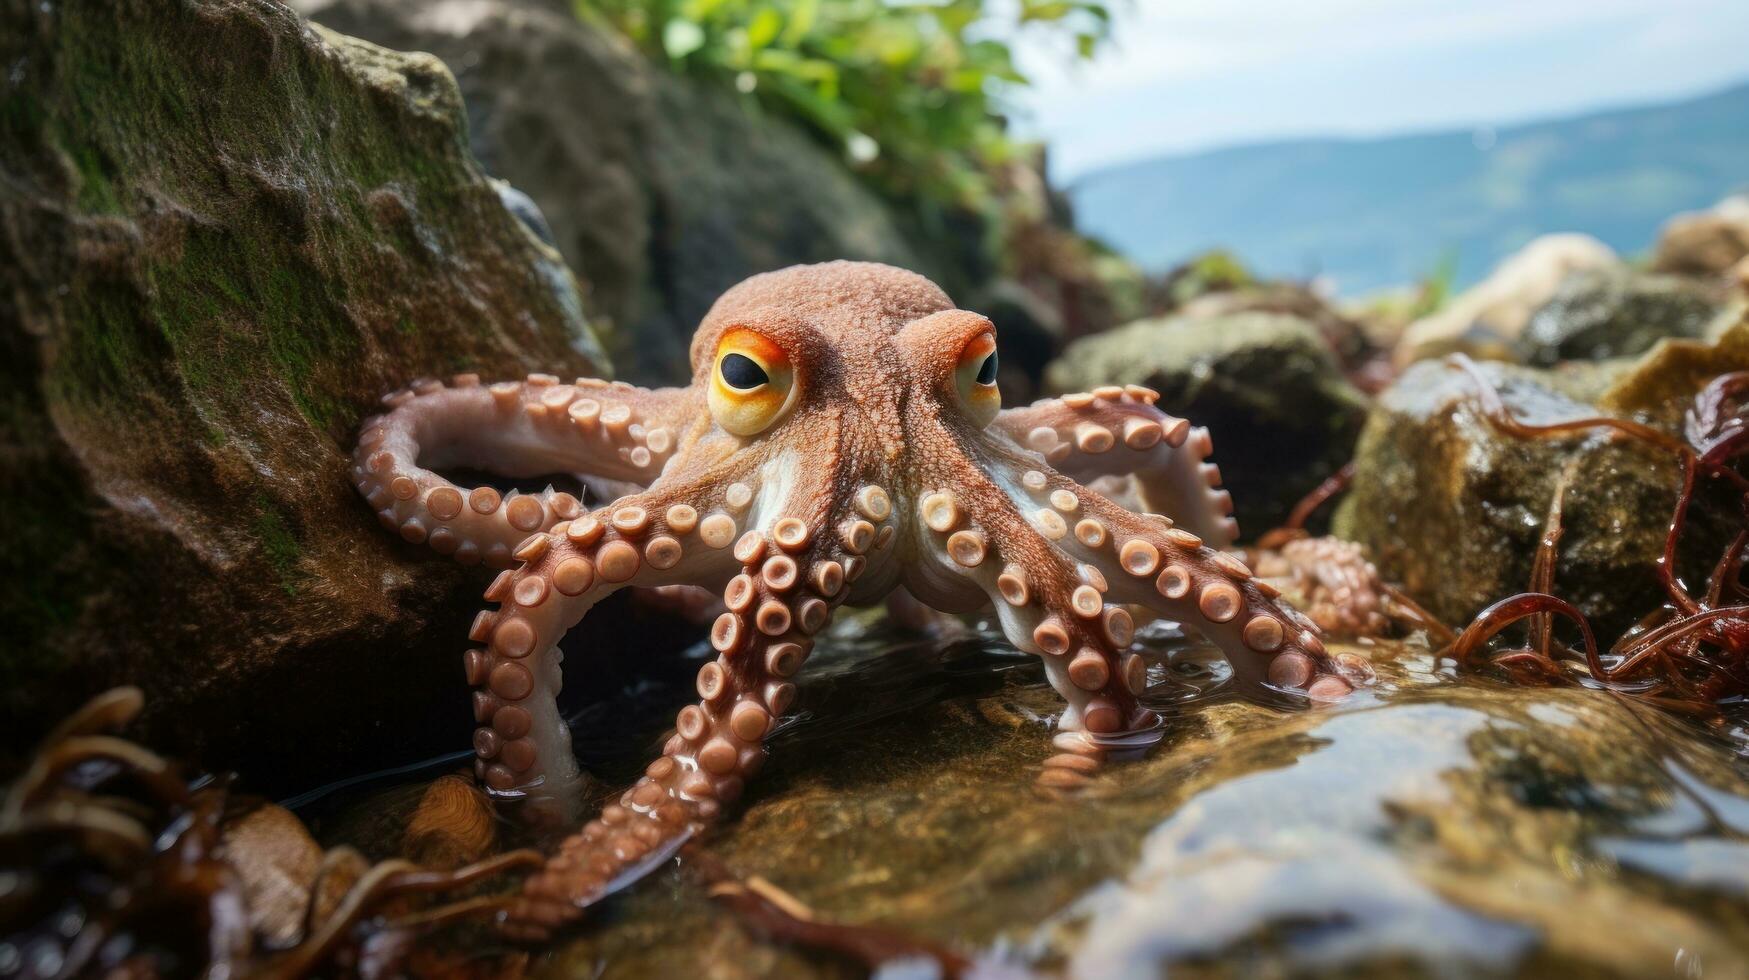 Elusive octopus camouflaged in the rocks and seaweed photo